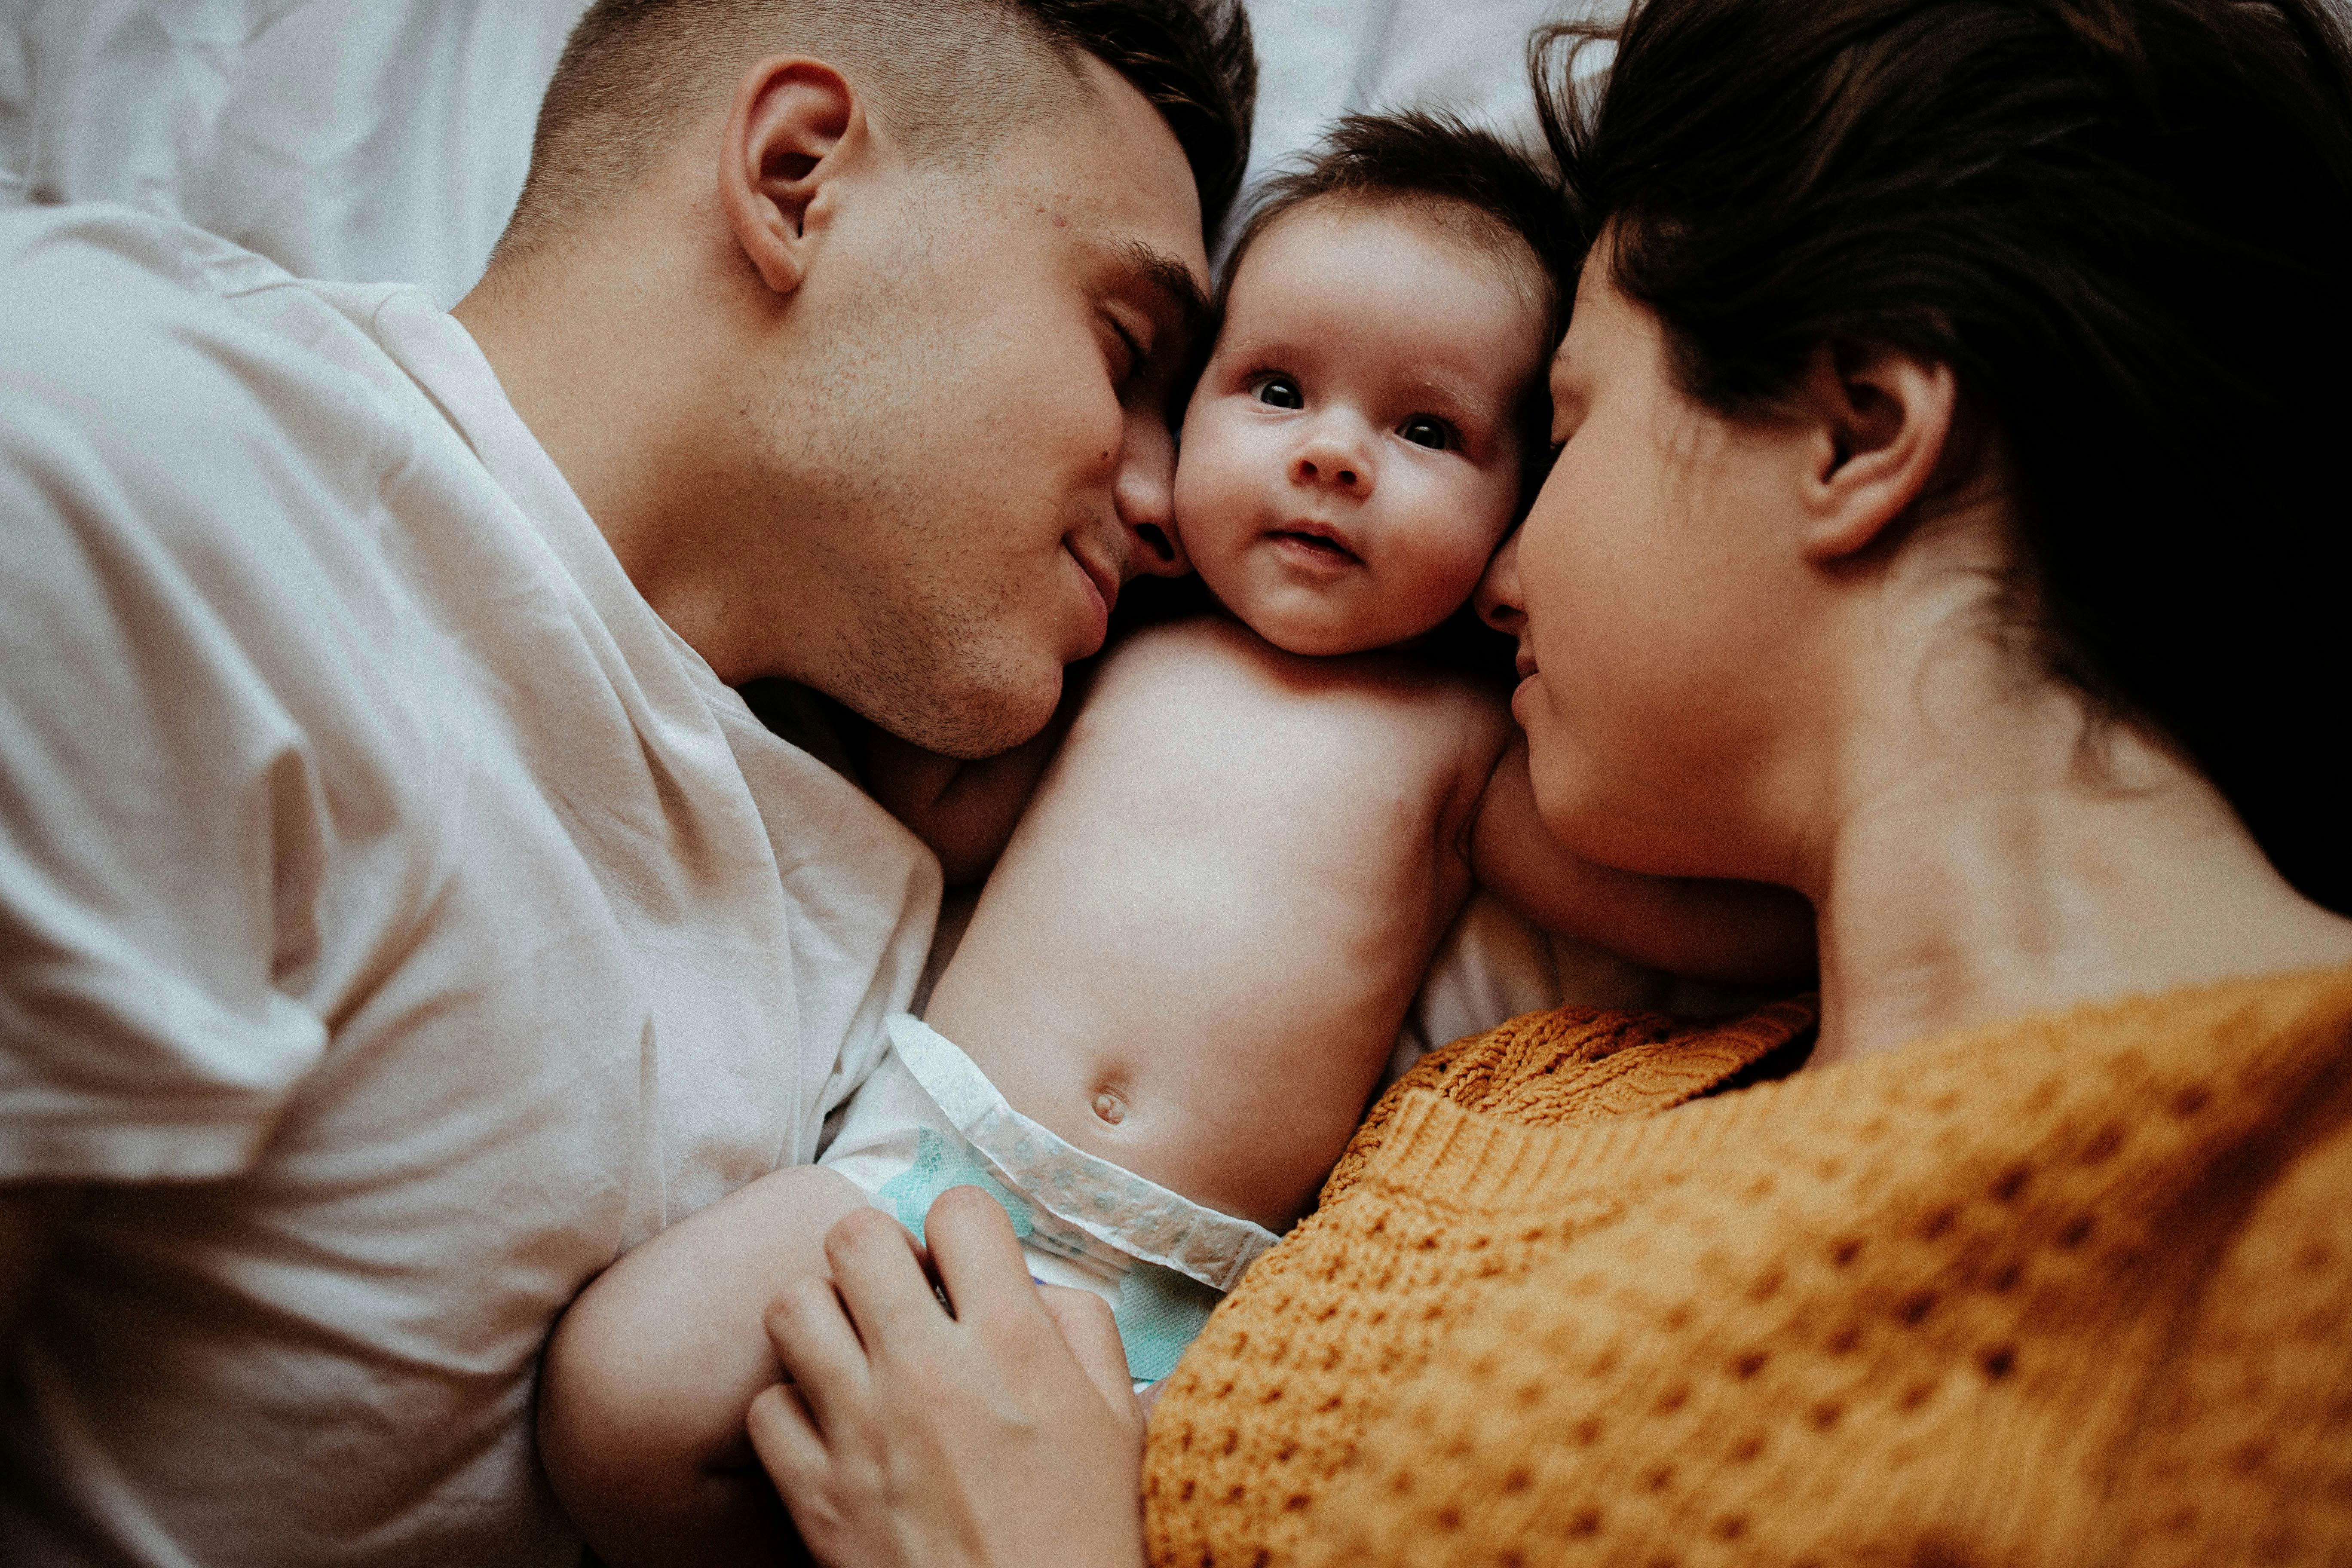 New parents doting on their baby | Source: Pexels